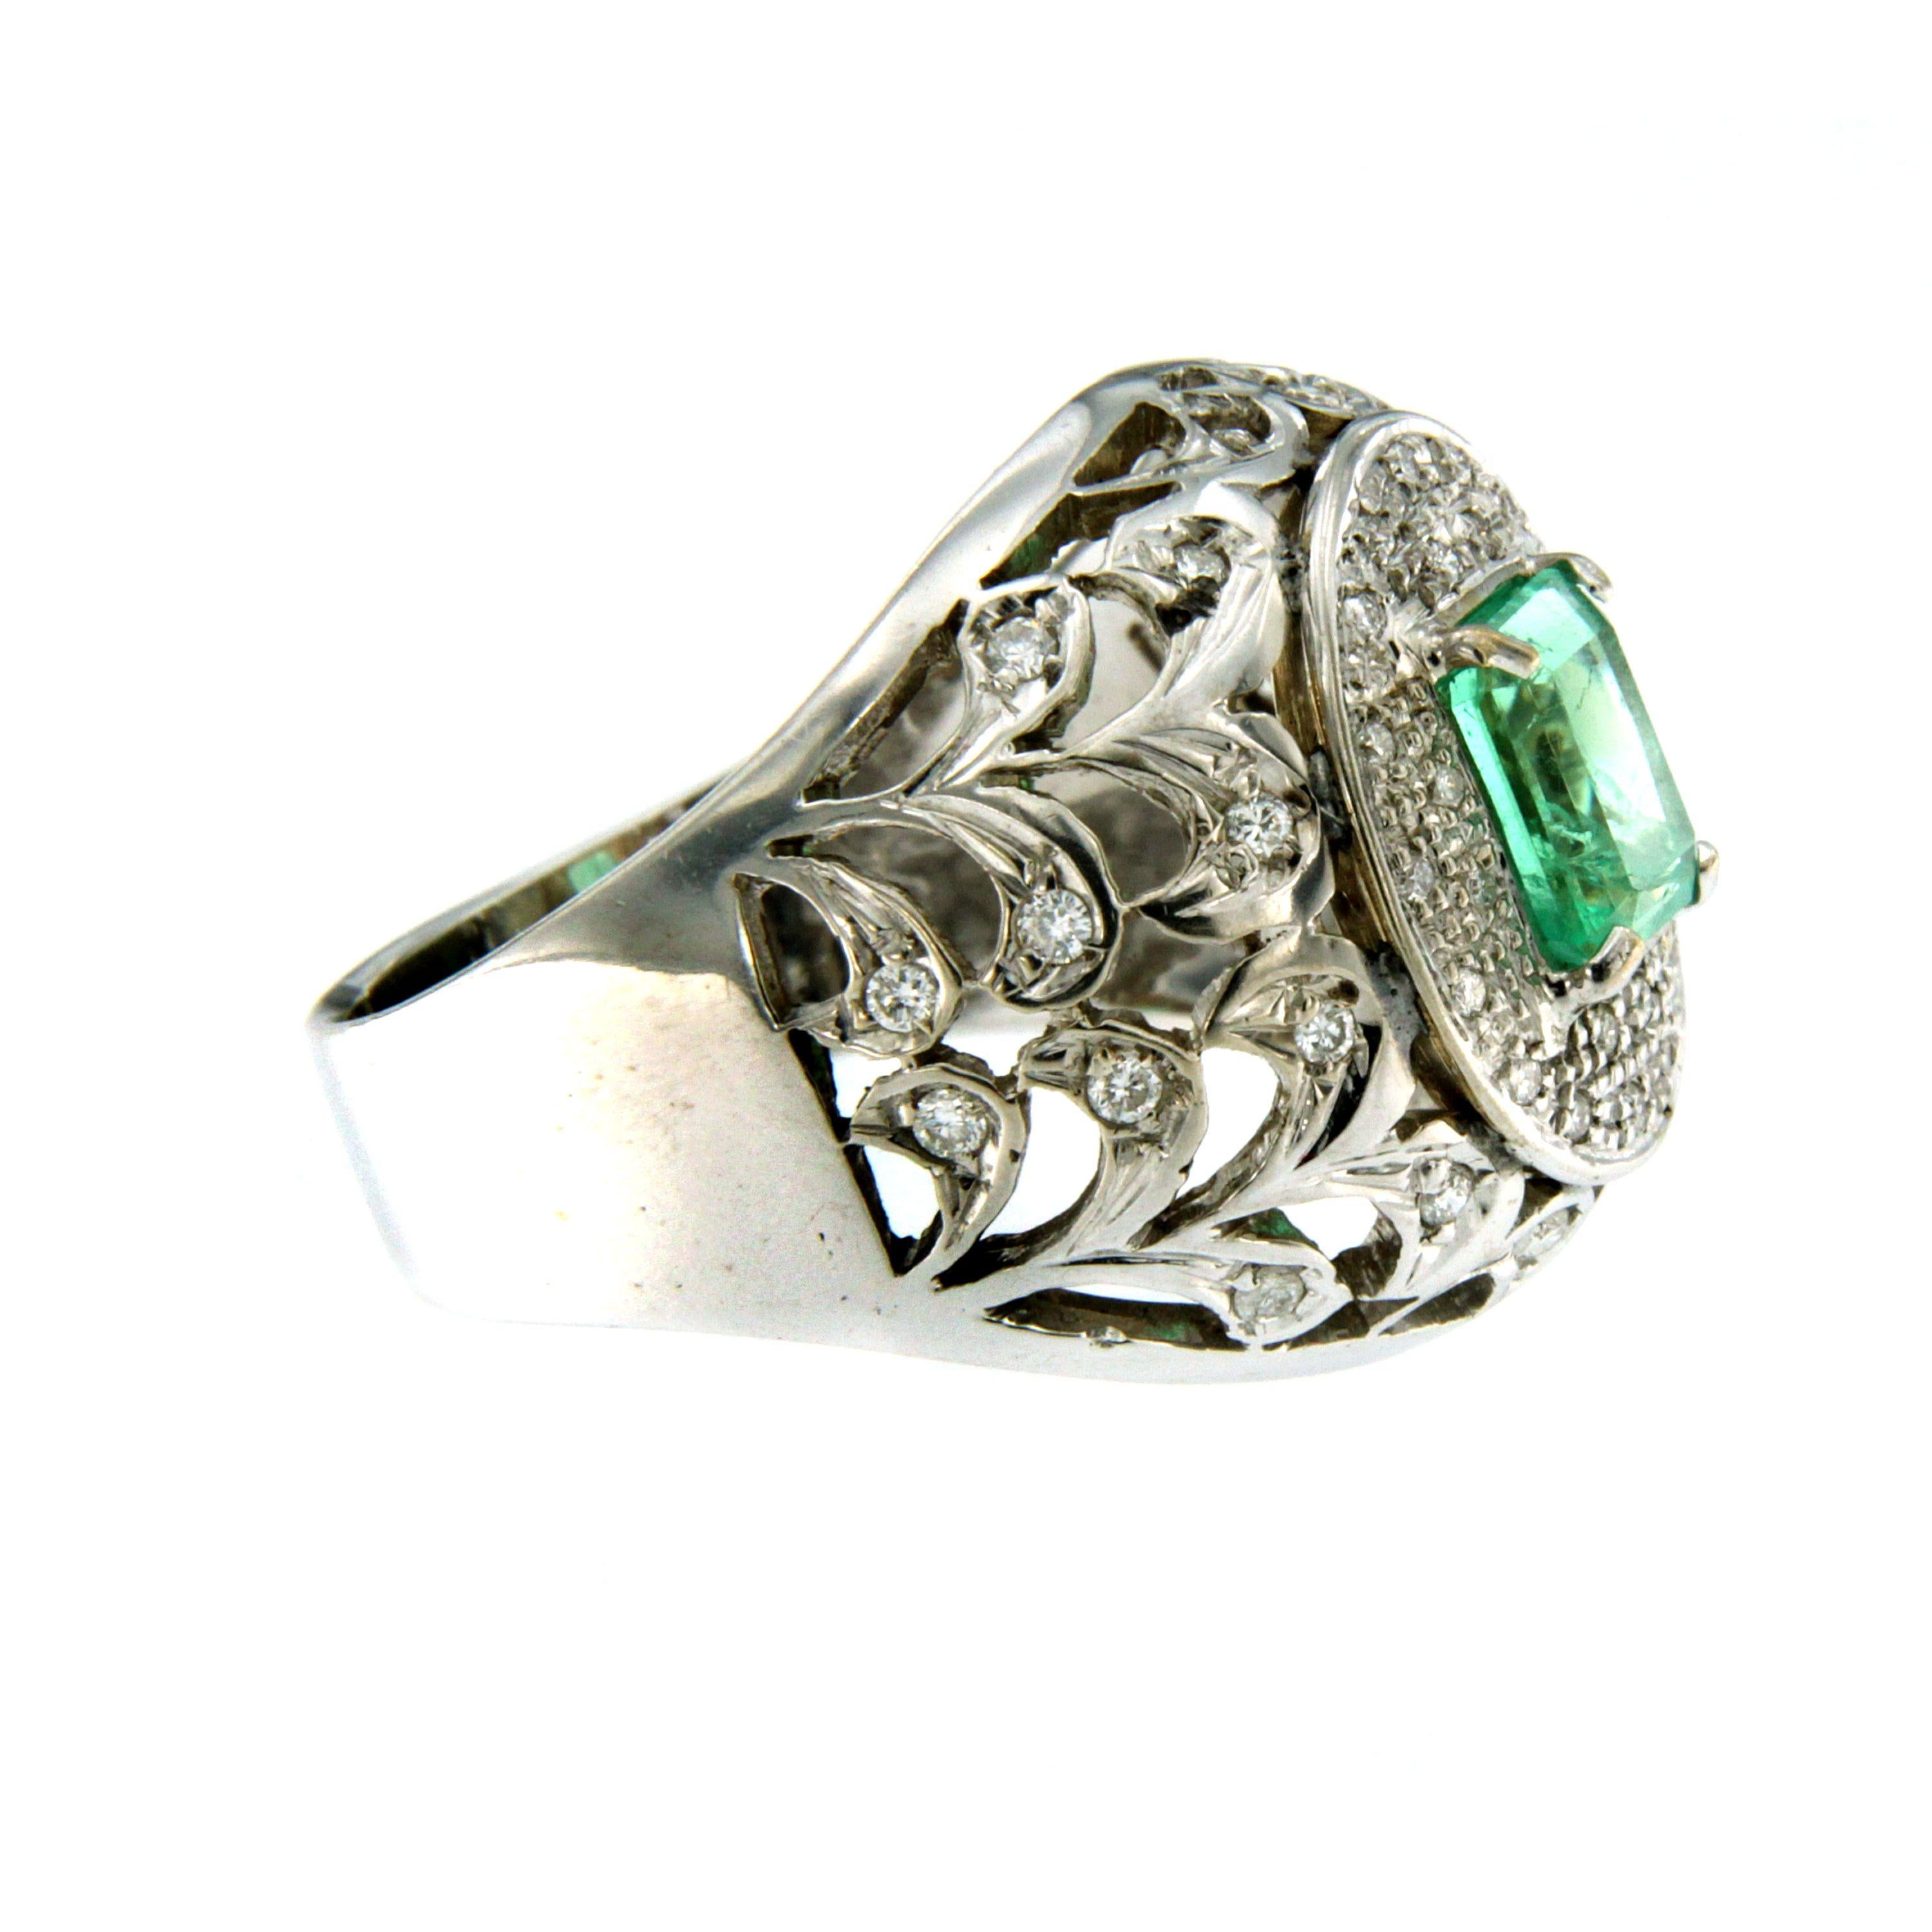 A beautiful emerald ring dated 1960, handmade in 18k white Gold showcasing an emerald cut Emerald in the center weighing approx. 1.80 carat and surrounded by 0,85 carat of diamonds graded G color Vvs clarity.

CONDITION: Pre-owned - Excellent